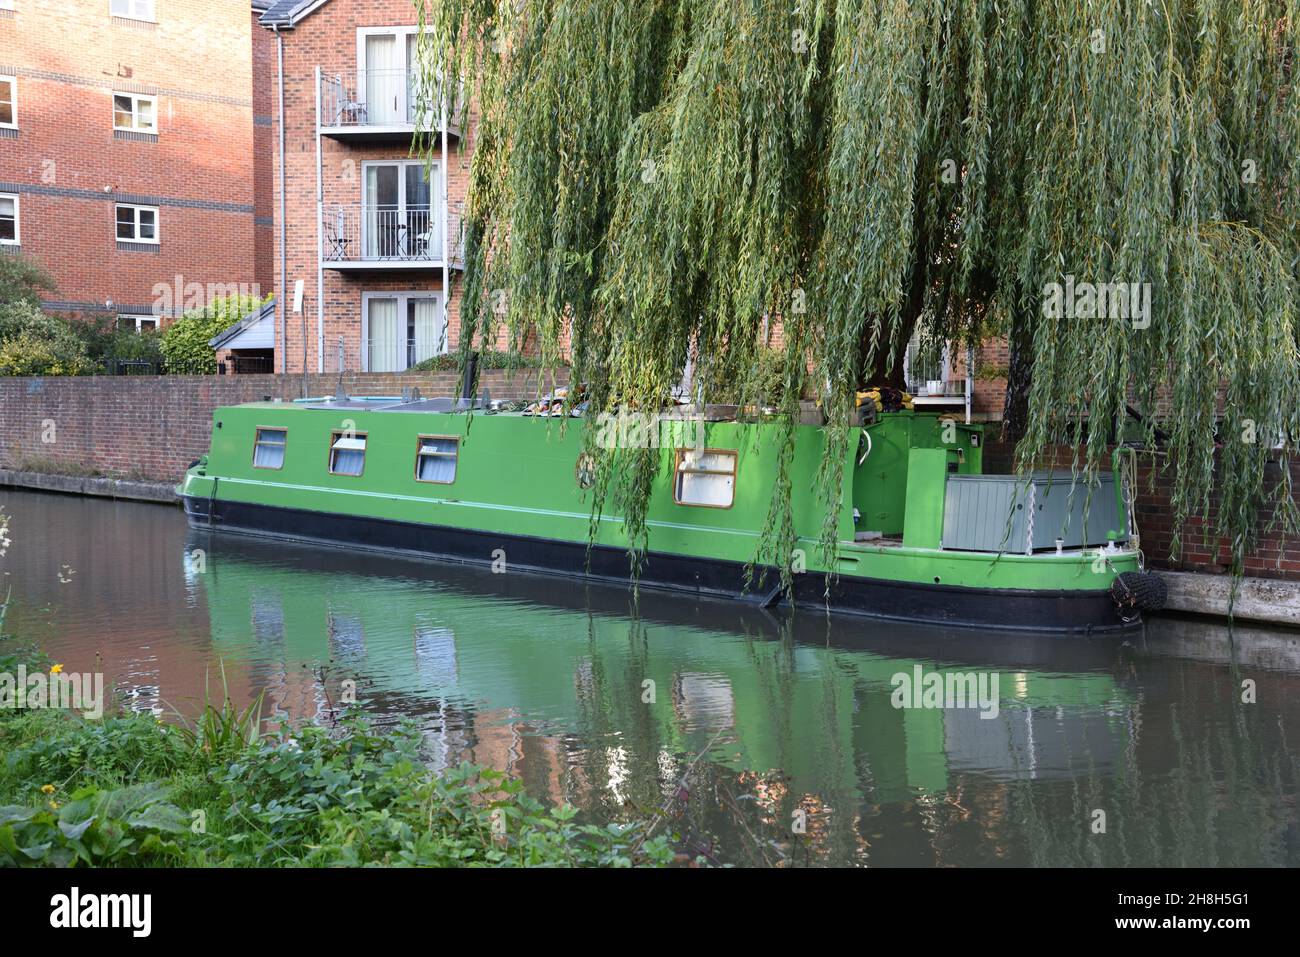 Green Canal Boat, Houseboat, Narrowboat ou long Boat & Weeping Willow sur le canal d'Oxford dans le district de Jericho Oxford Angleterre Royaume-Uni Banque D'Images